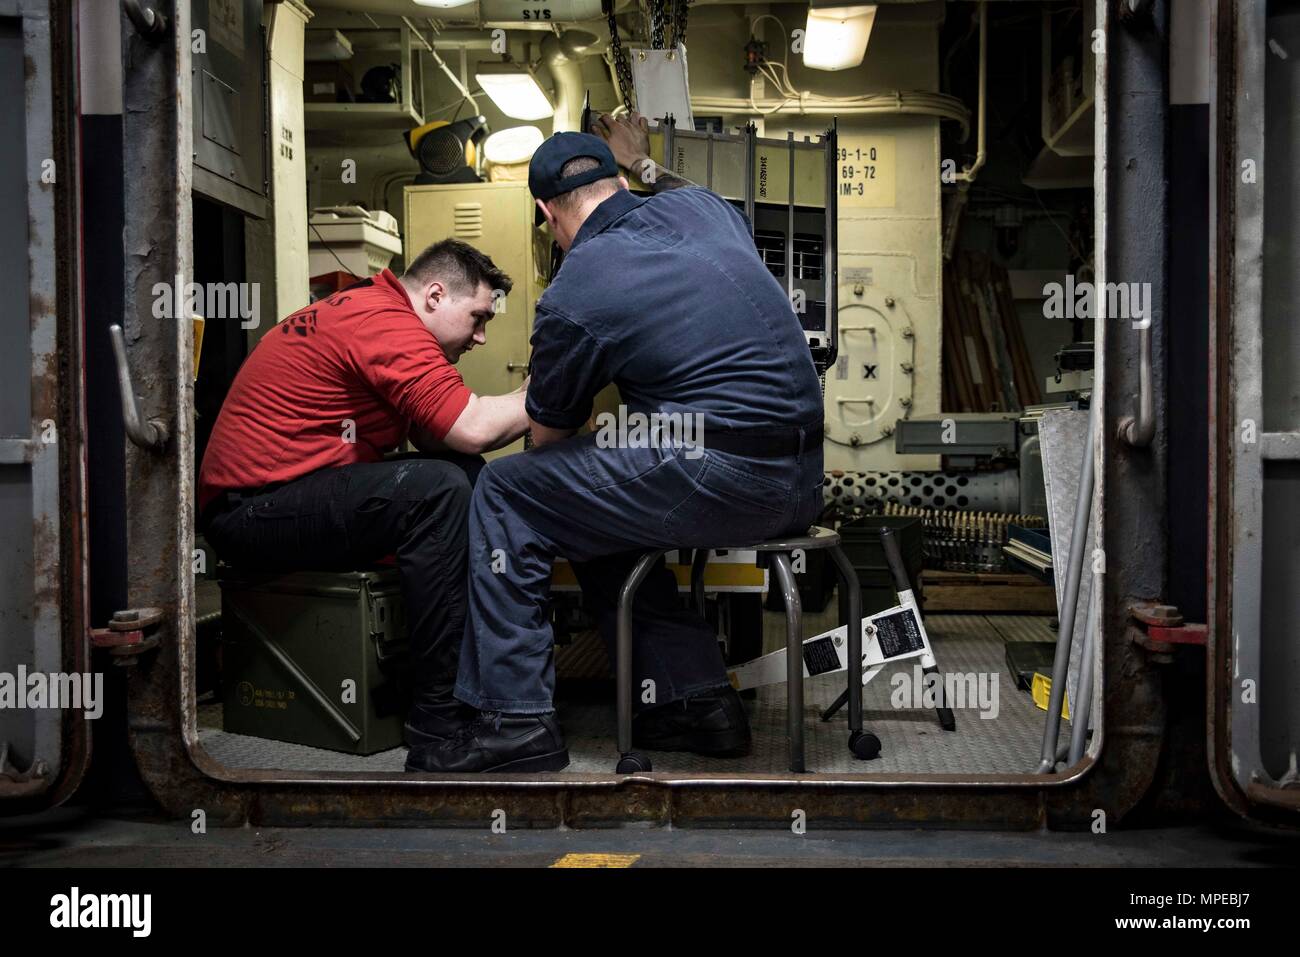 170212-N-IE397-011  ATLANTIC OCEAN (Feb 12, 2017) Aviation Ordnanceman Airman Aaron Dates, from Atlanta, left, and Aviation Ordnanceman 2nd Class Samuel Canning, from St. John's, Newfoundland, Canada, conduct maintenance on a link-less ammunition loading system in the ordnance shop of the aircraft carrier USS Dwight D. Eisenhower (CVN 69) (Ike). Ike is currently conducting aircraft carrier qualifications during the Sustainment Phase of the Optimized Fleet Response Plan (OFRP). (U.S. Navy photo by Mass Communication Specialist 3rd Class Christopher A. Michaels) Stock Photo